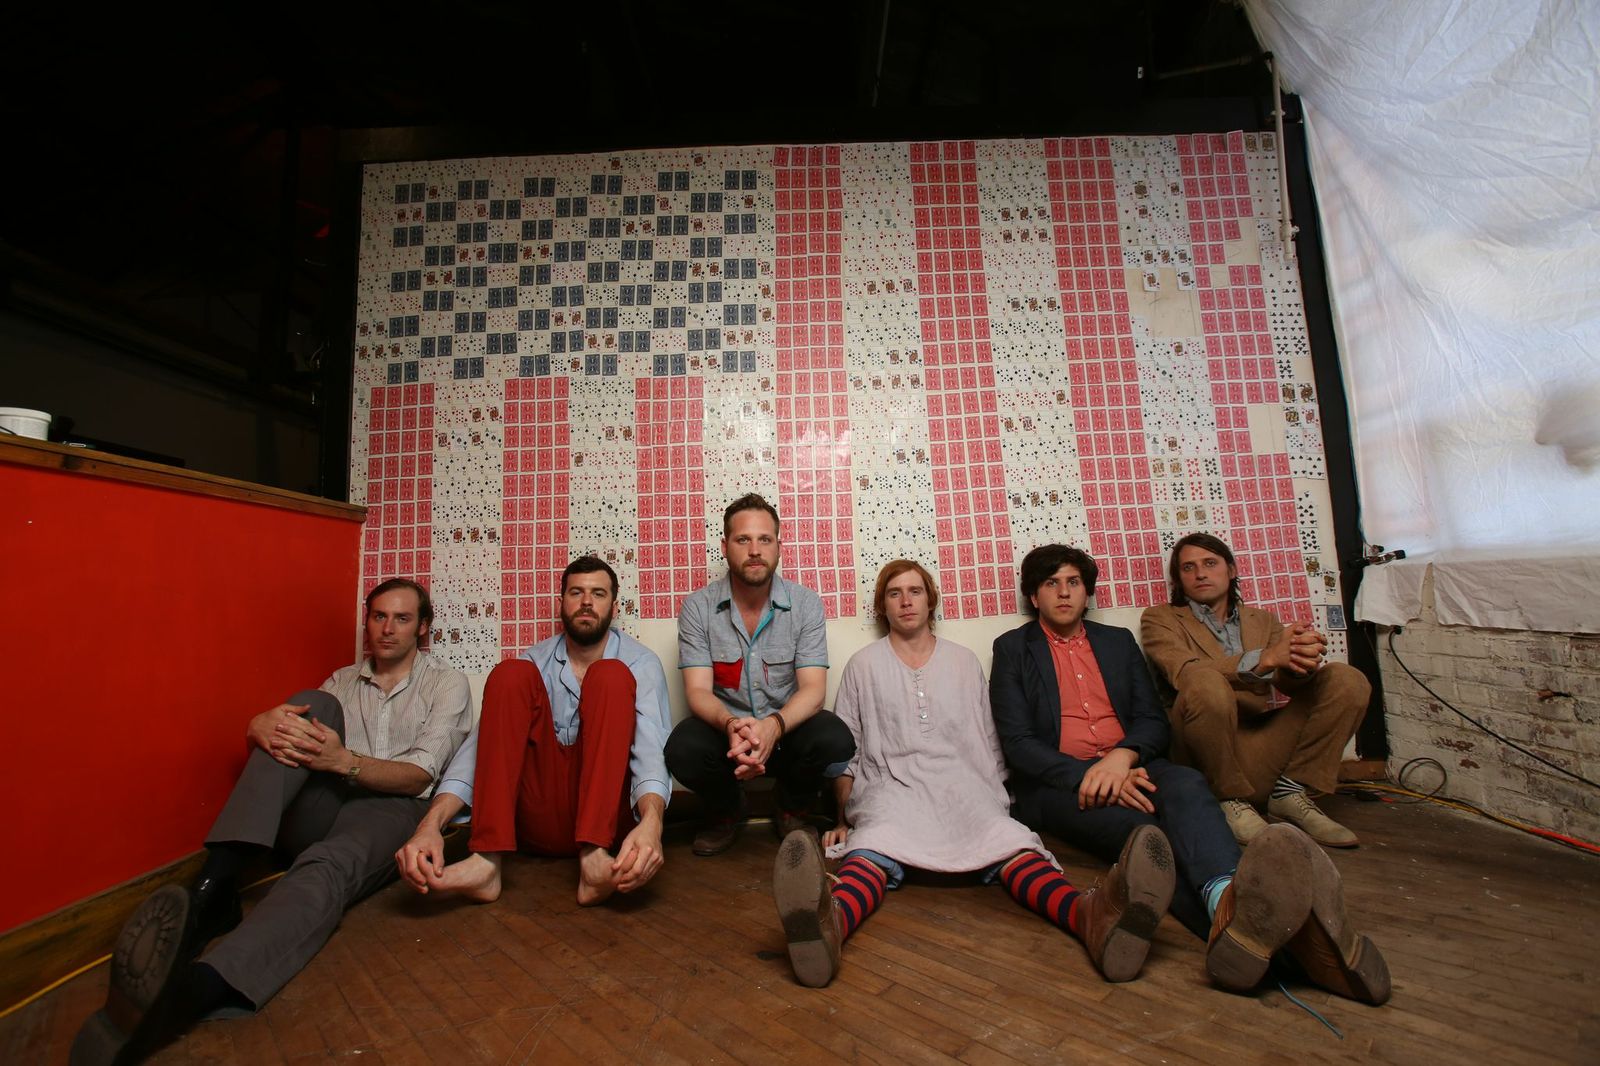 [Show Preview]: Dr. Dog Sells Out The Orange Peel